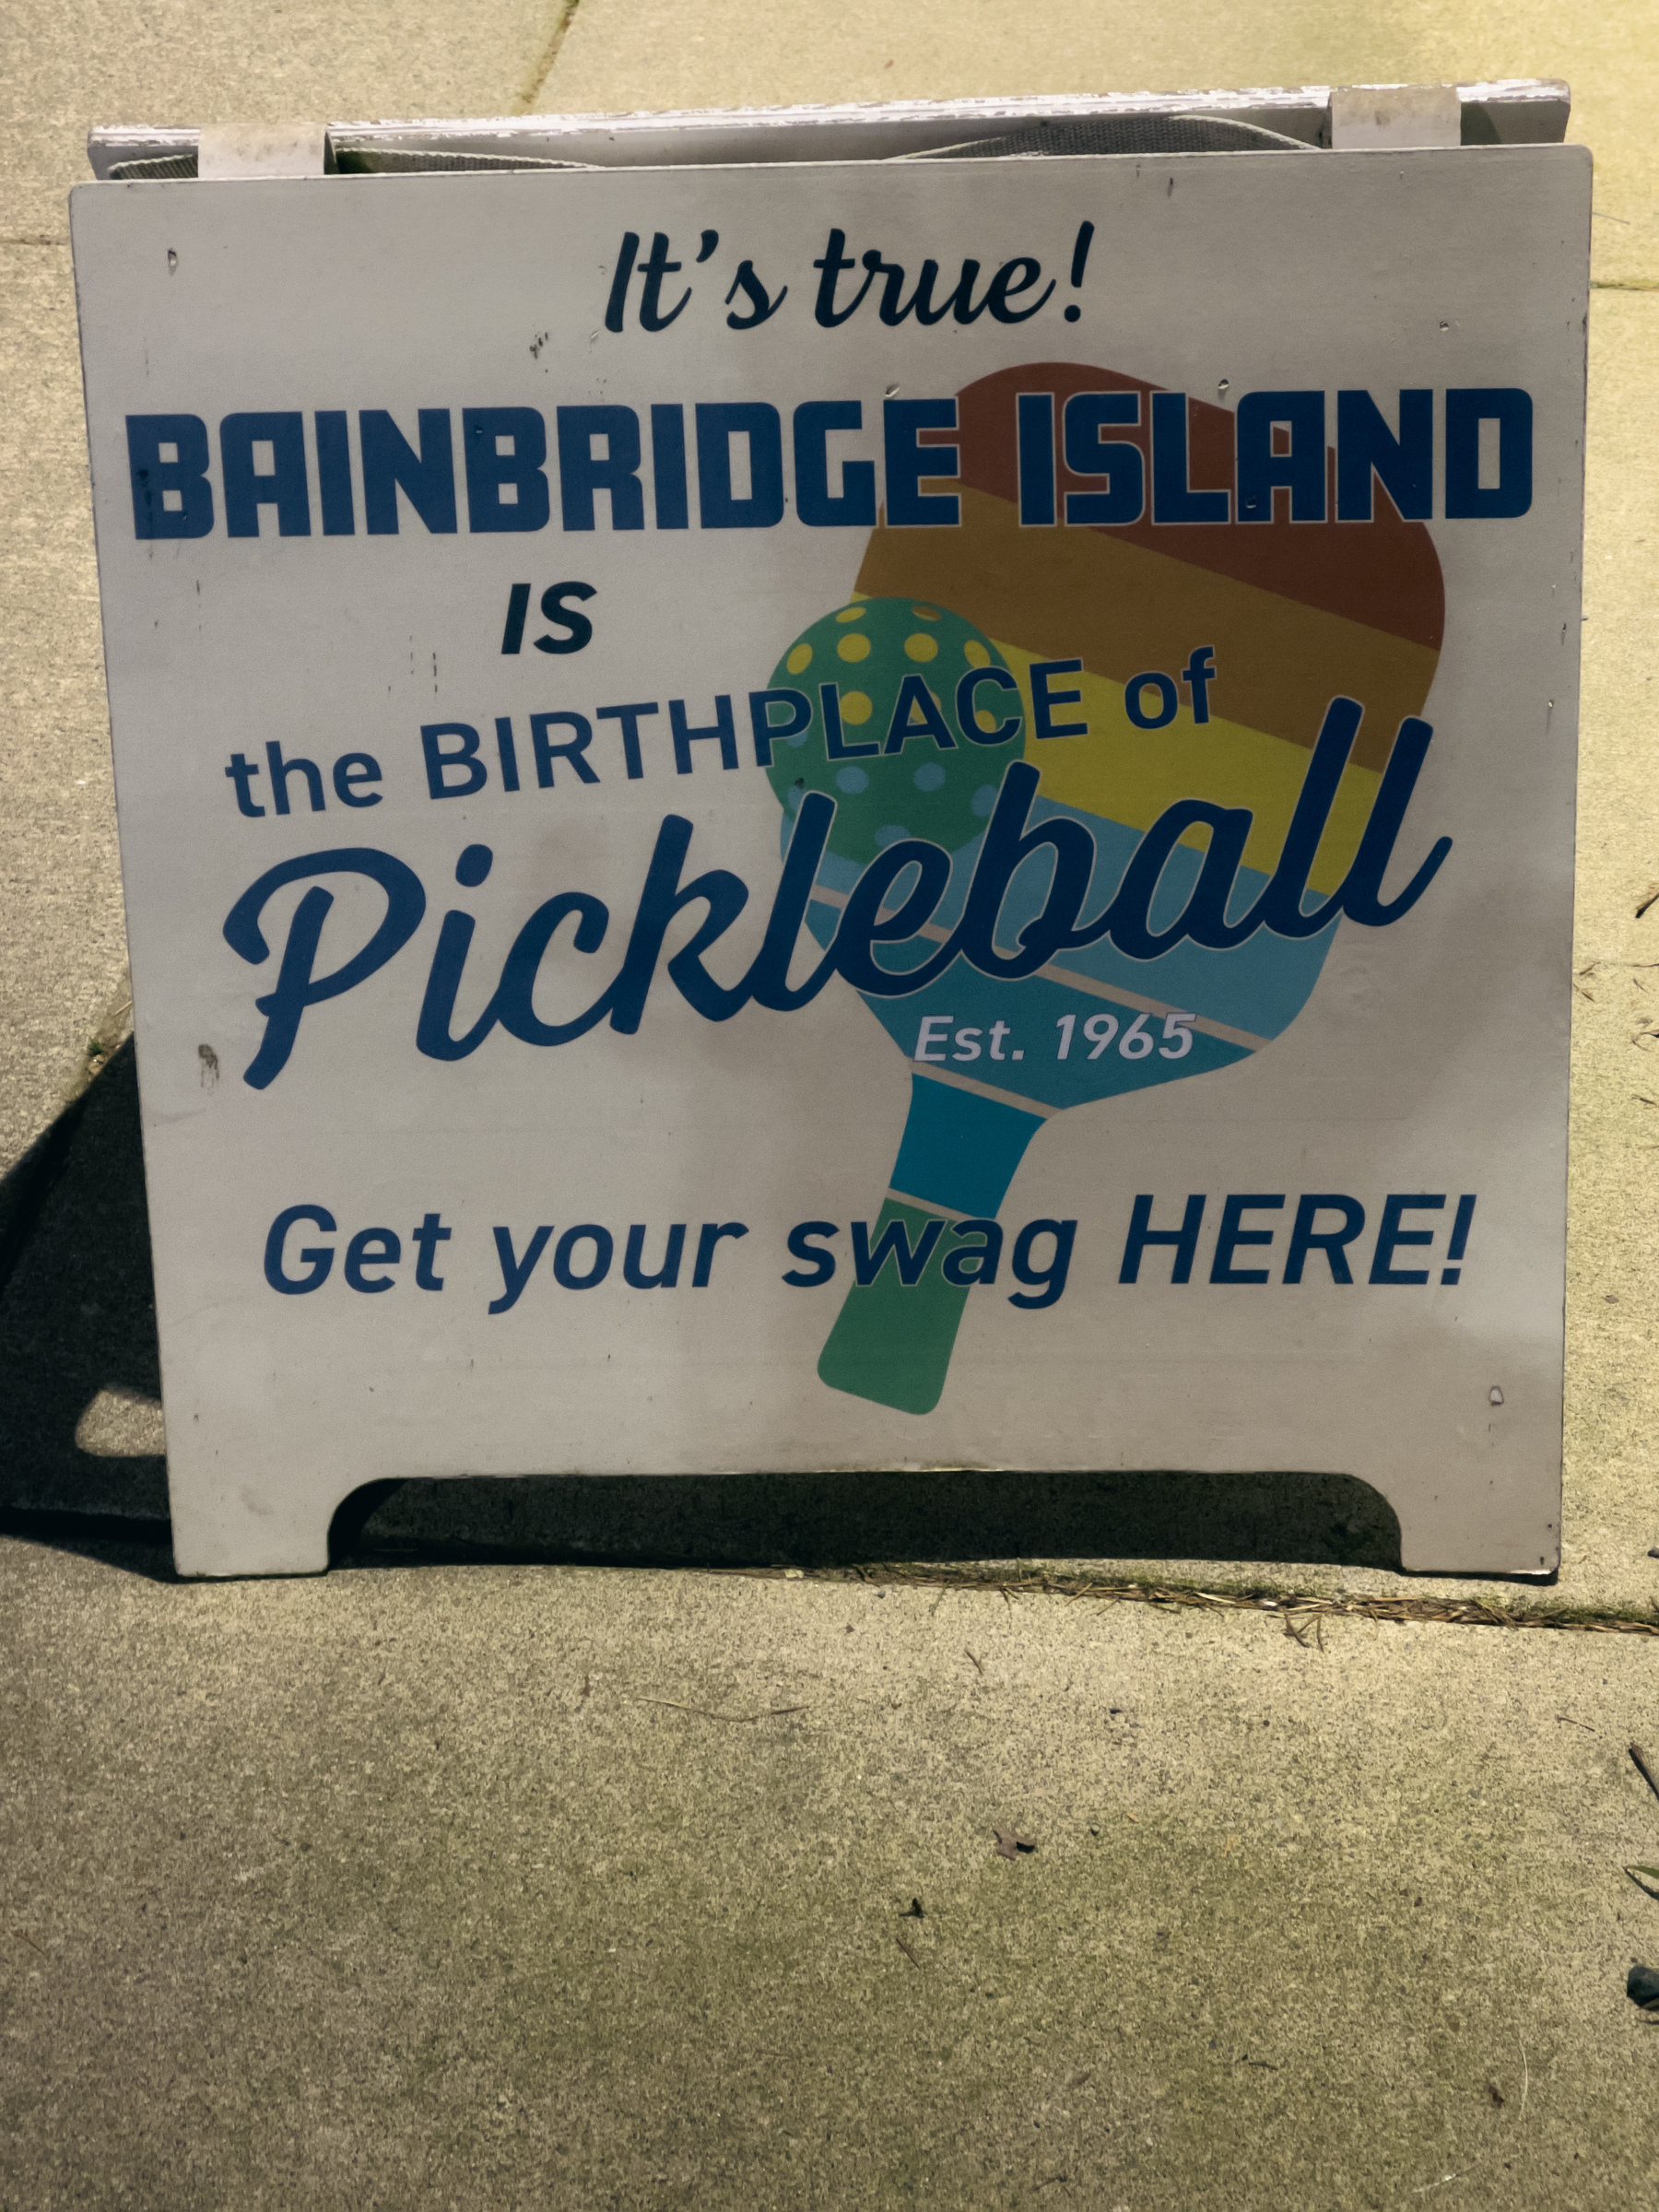 Sandwich sign with “It’s true! Bainbridge Island is the birthplace of Pickleball. Est 1965. Get your swag HERE!